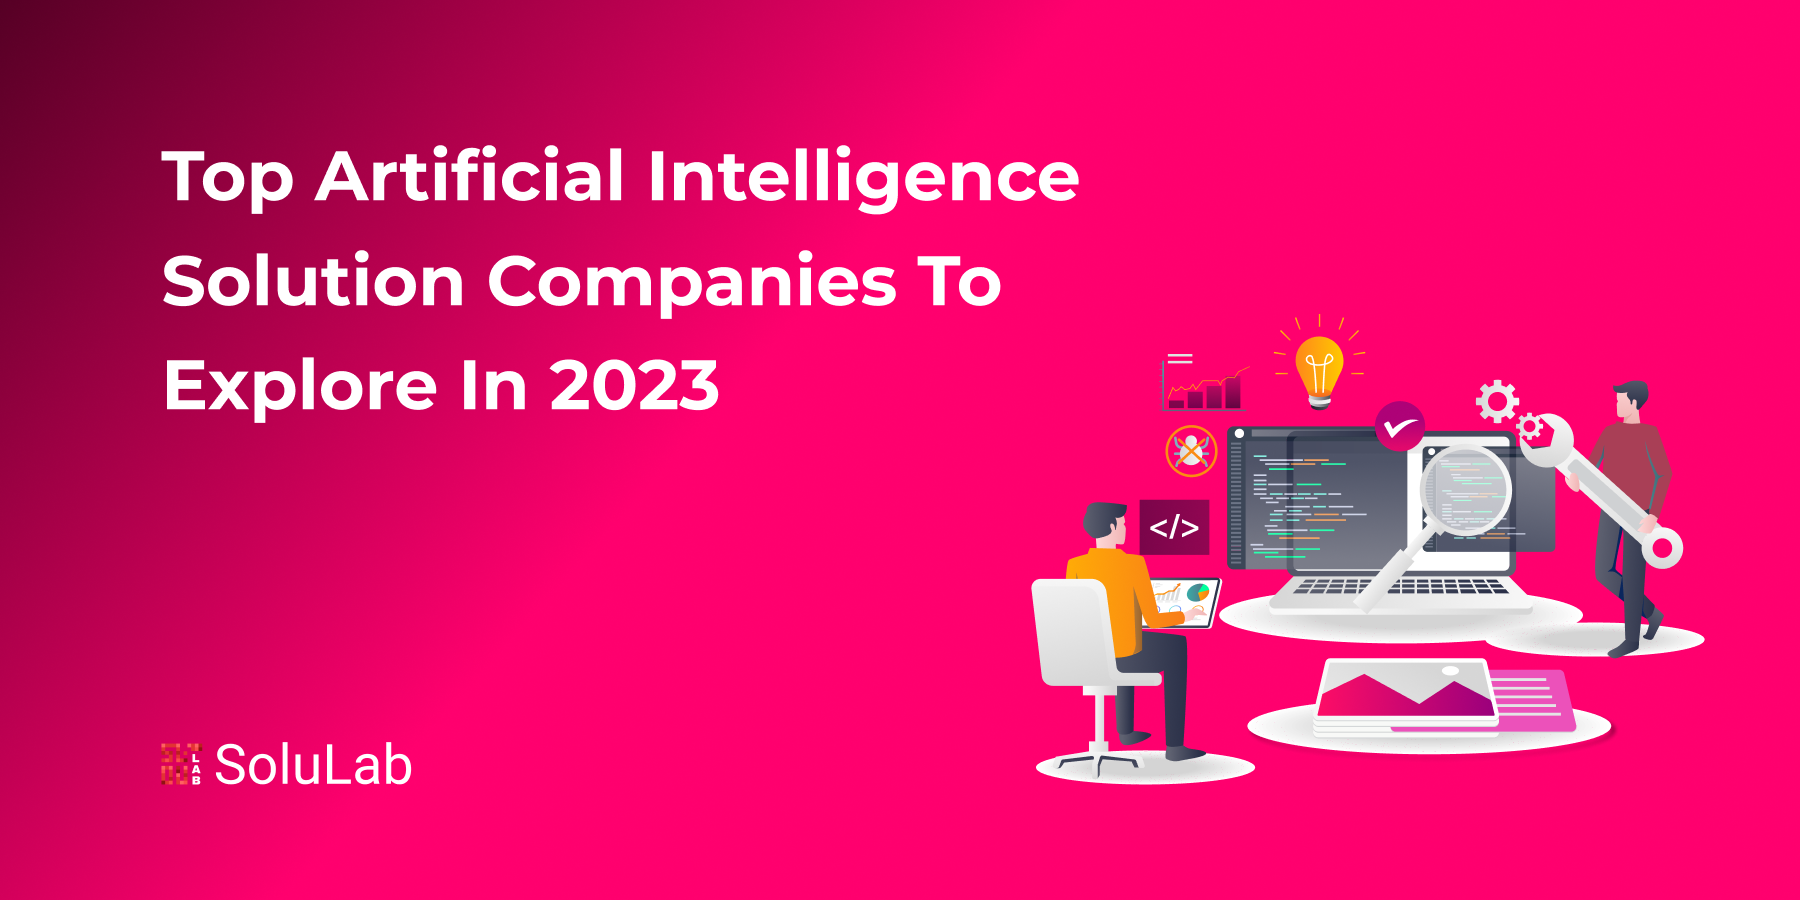 Top Artificial Intelligence Solution Companies To Explore in 2023